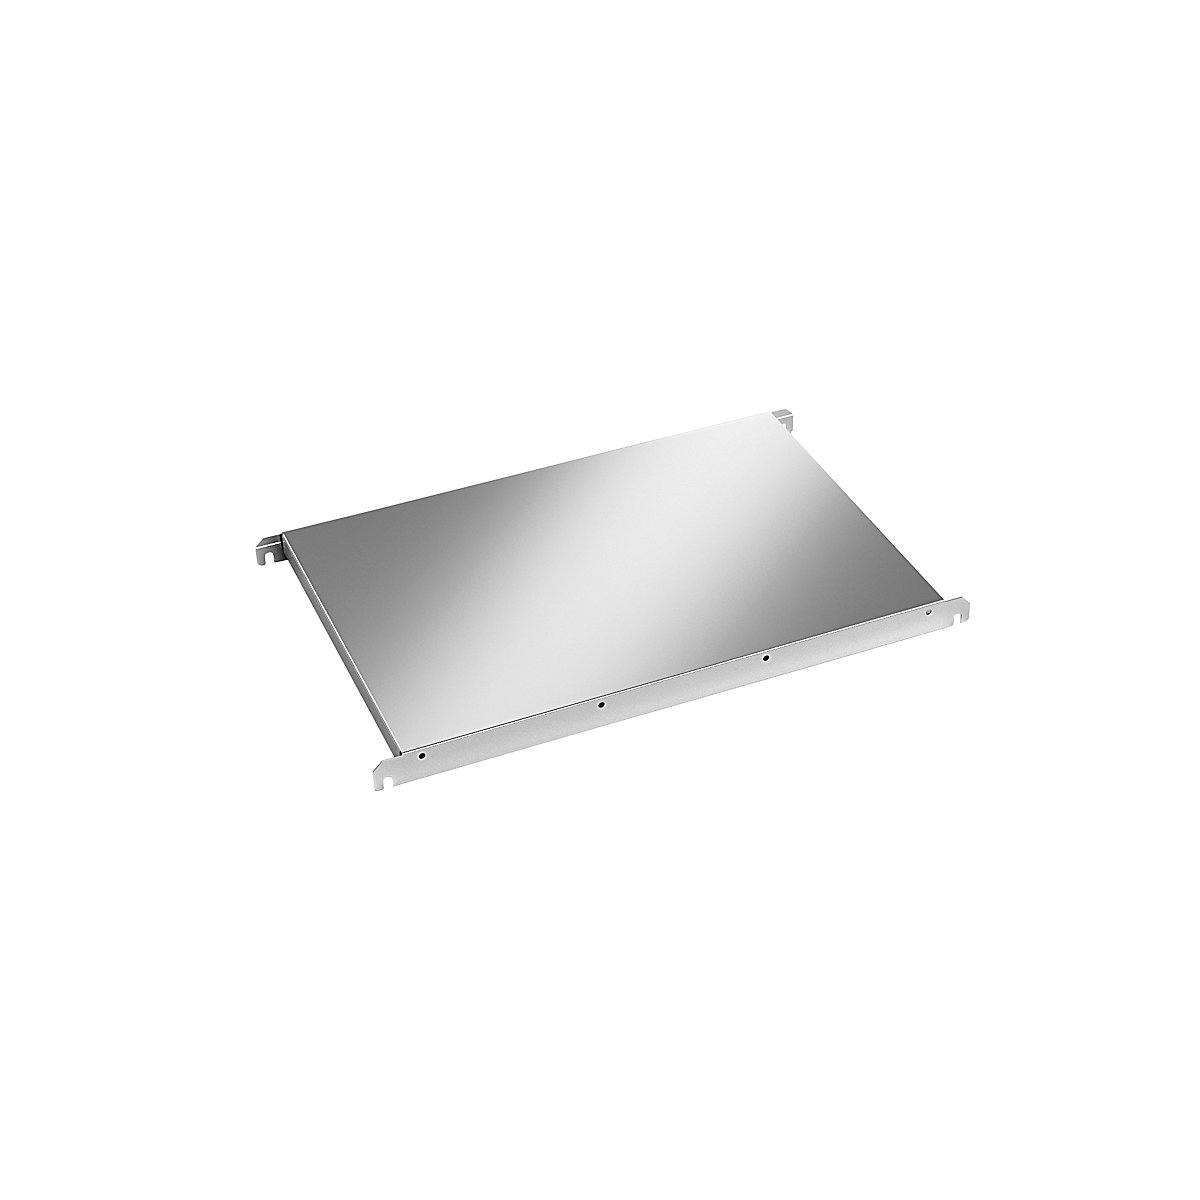 Stainless steel shelf, solid, WxD 640 x 440 mm